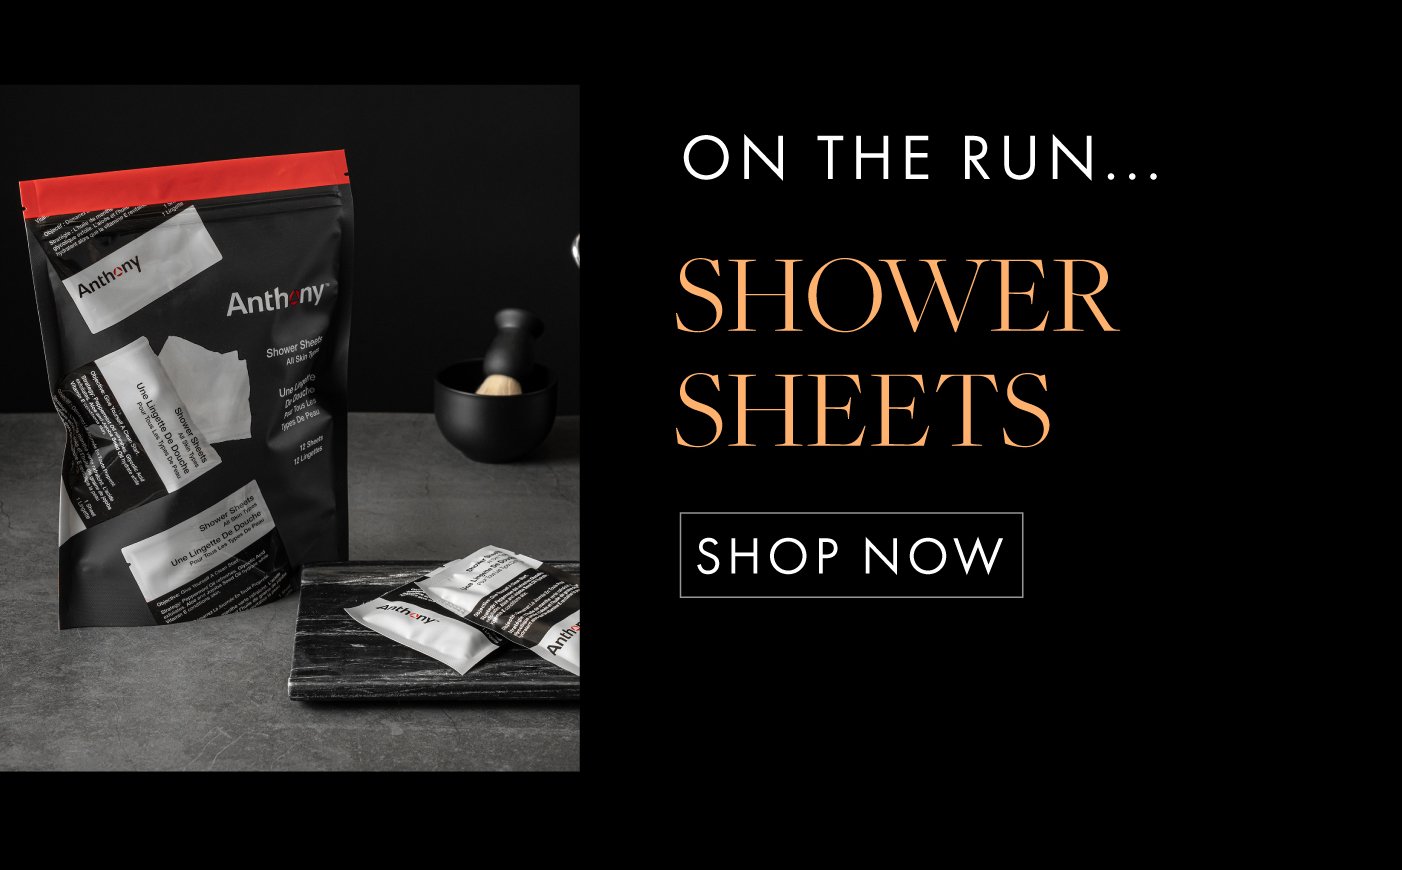 On the run... Shower Sheets